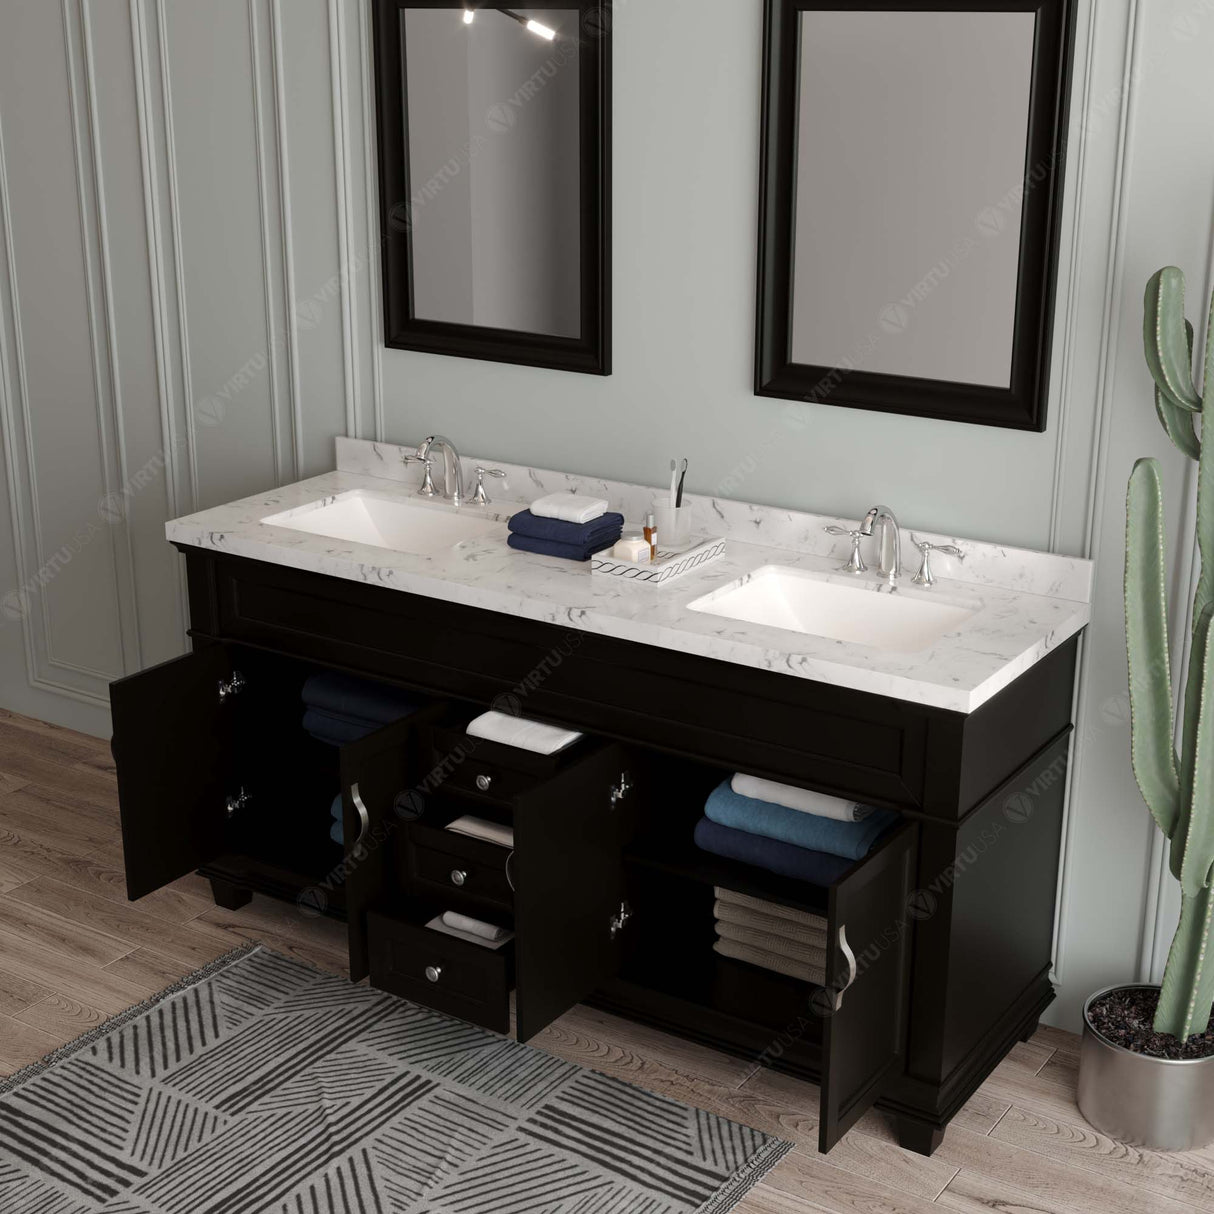 Virtu USA Victoria 72" Double Bath Vanity with Cultured Marble White Top and Square Sinks with Polished Chrome Faucets with Matching Mirror